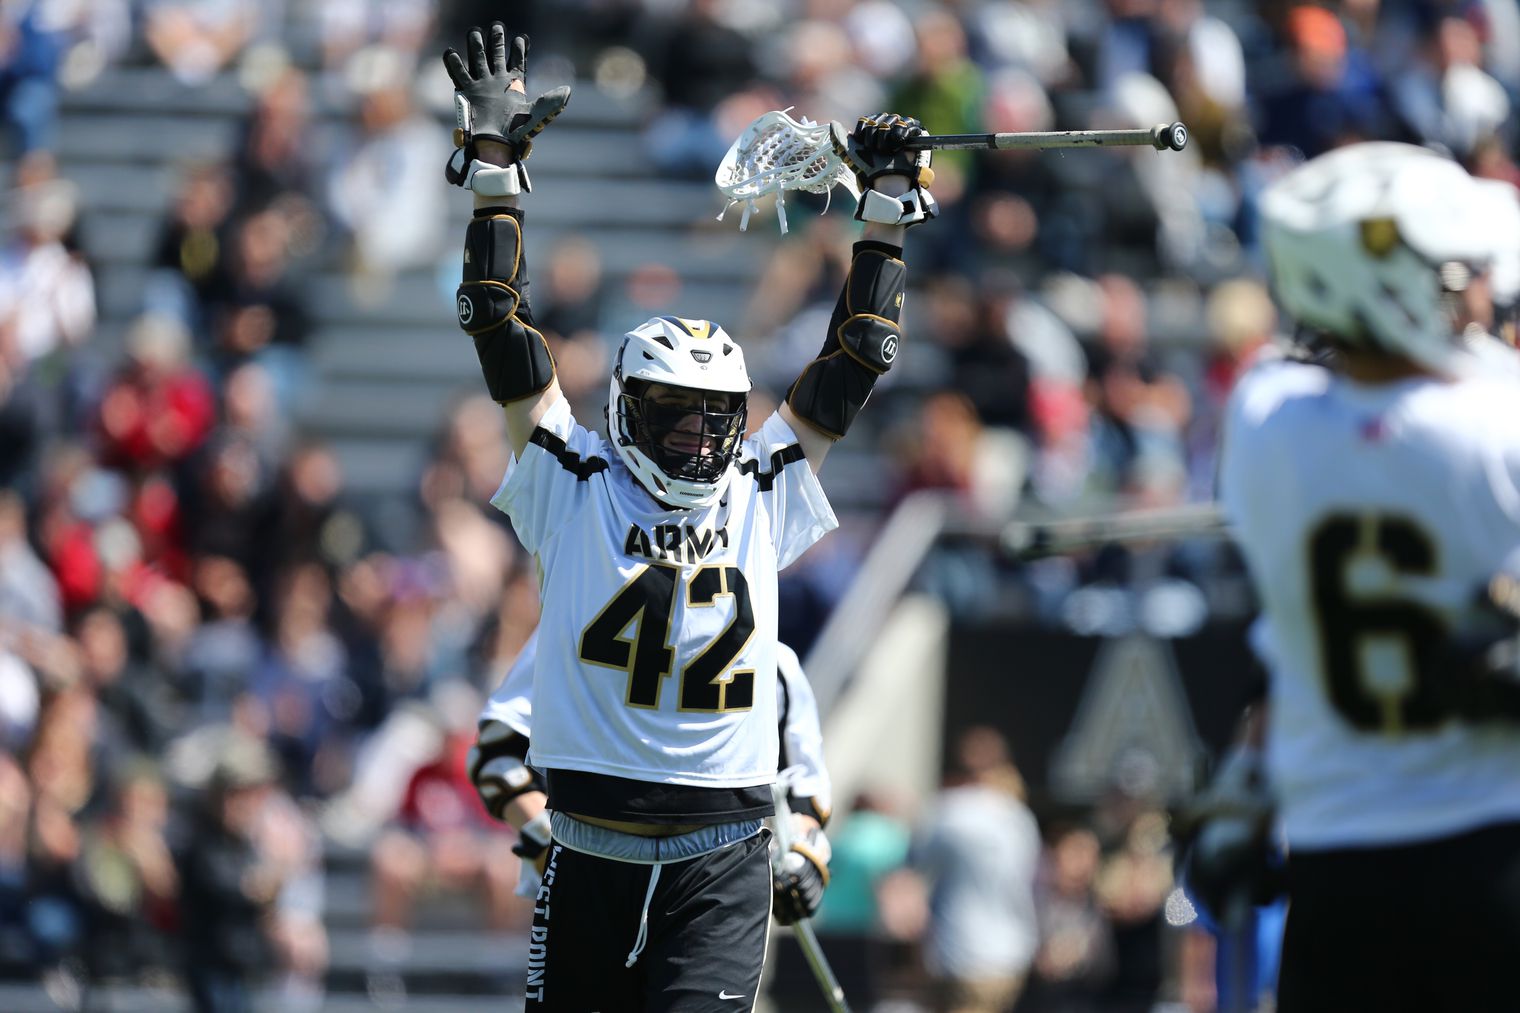 Previewing Army West Point’s 2020 men’s college lacrosse schedule